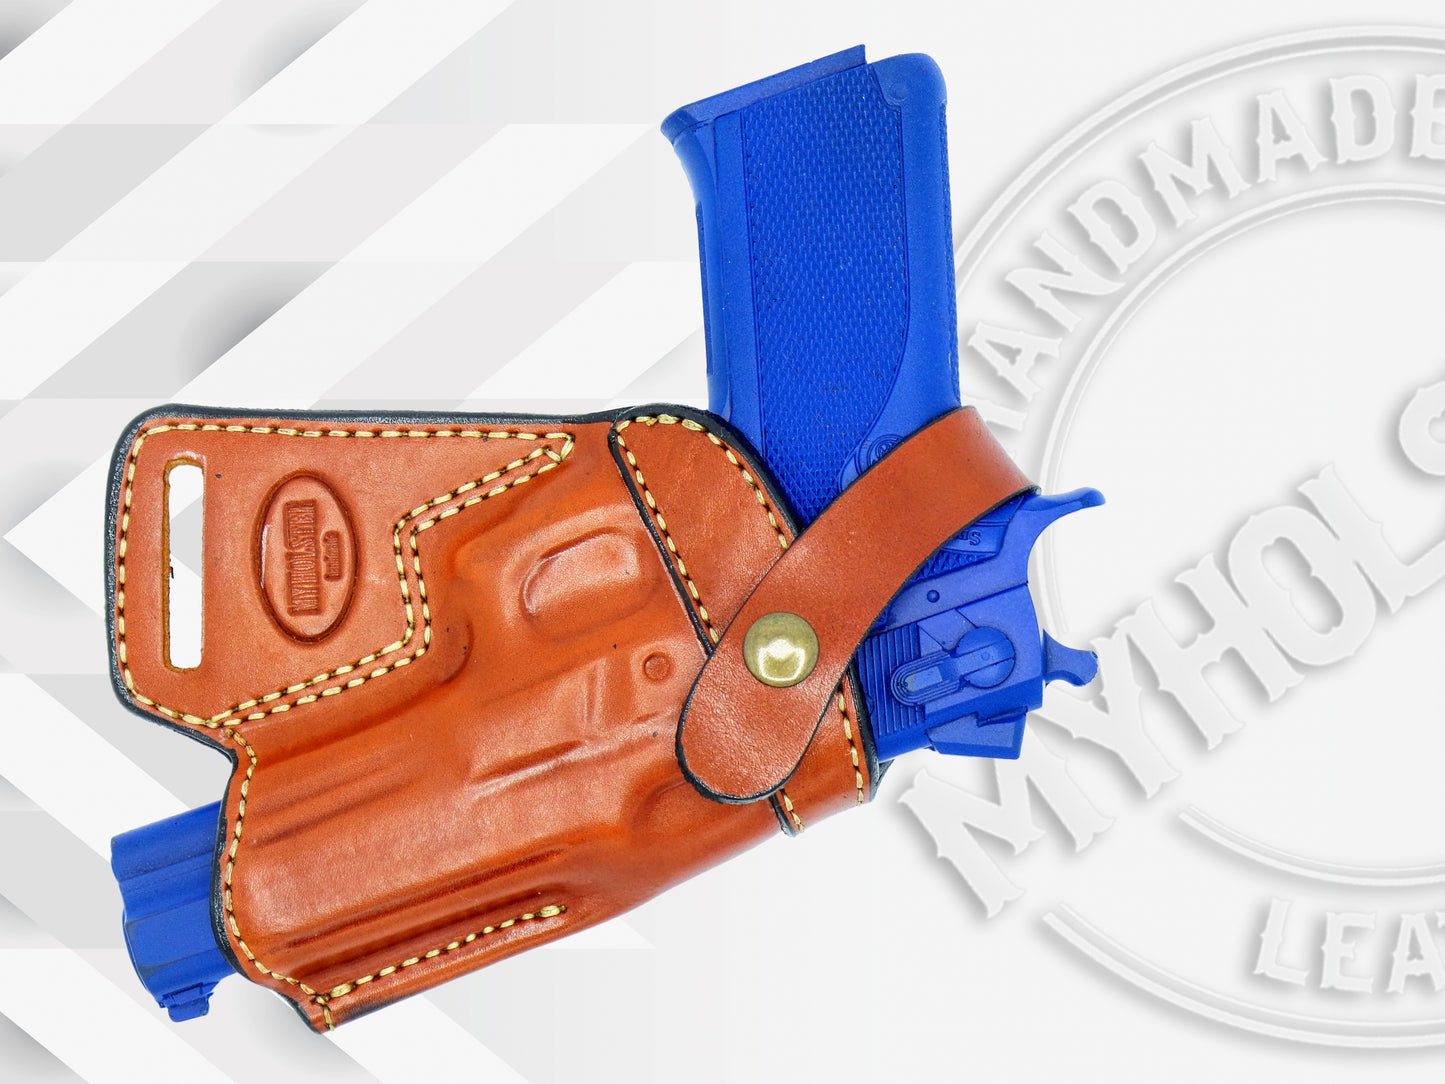 Smith & Wesson Model 4506 SOB Small Of the Back Leather Holster